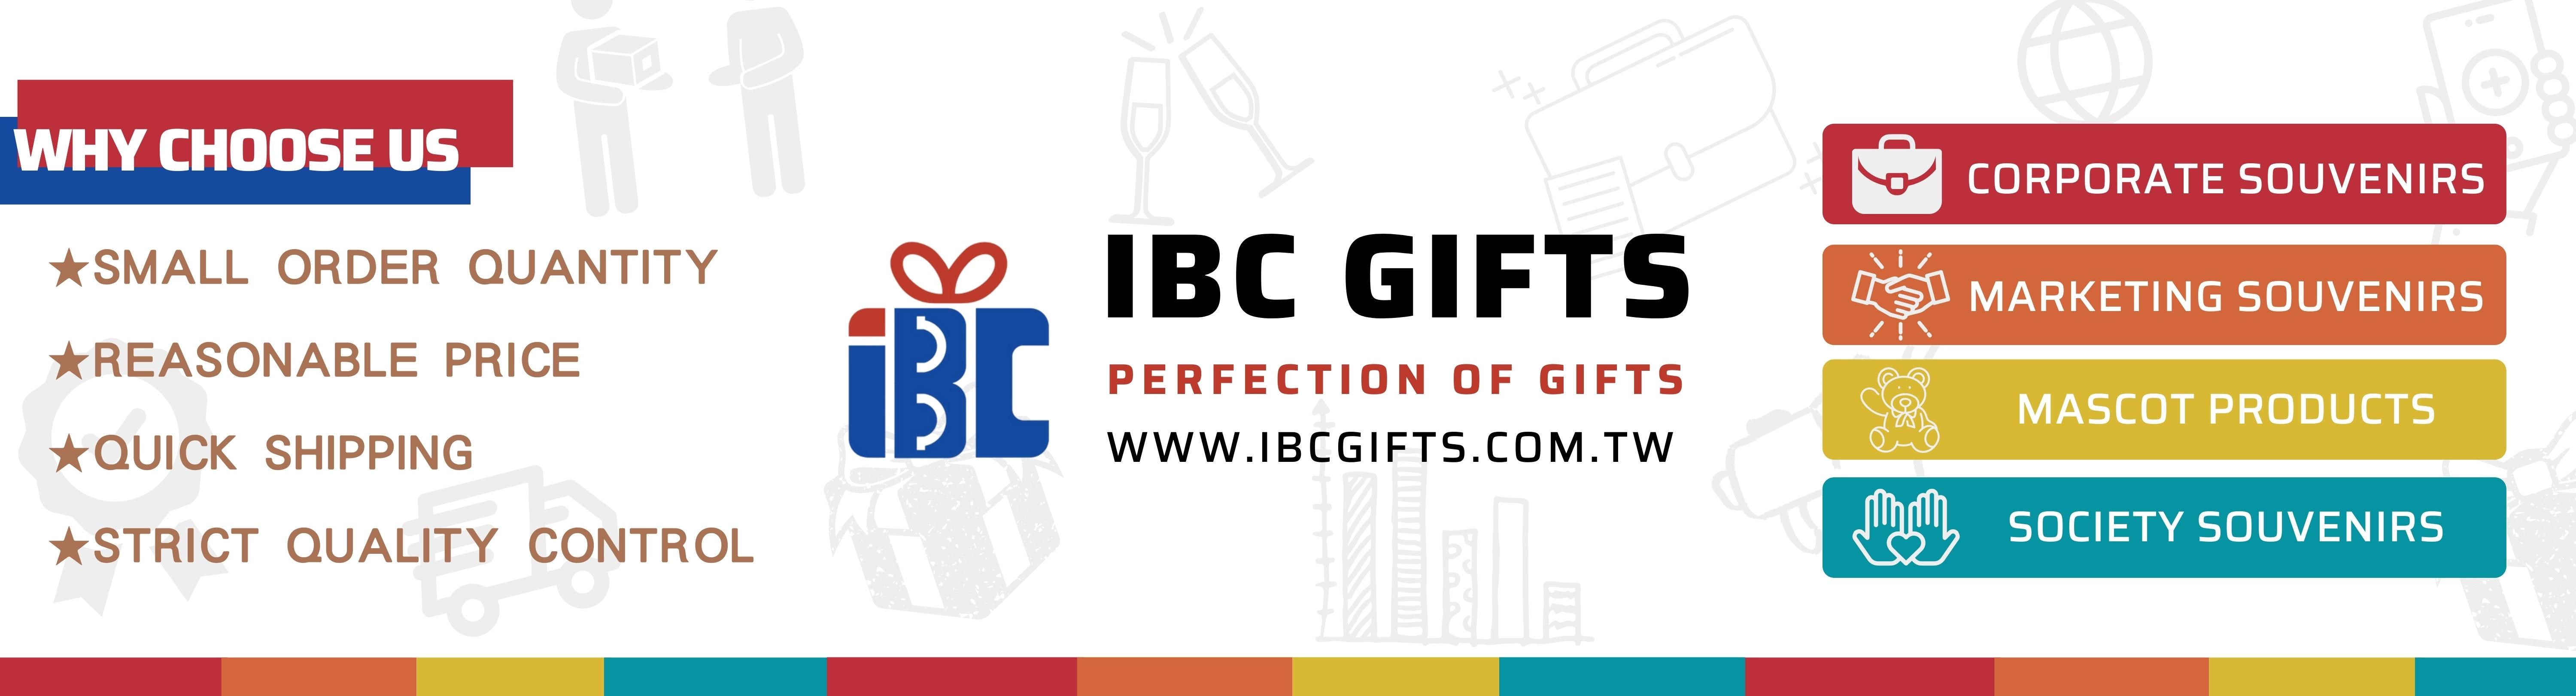 Why IBC GIFTS? SMALL MOQ REASONABLE PRICE QUICK SHIPPING STANDARD QUALITY CHECK